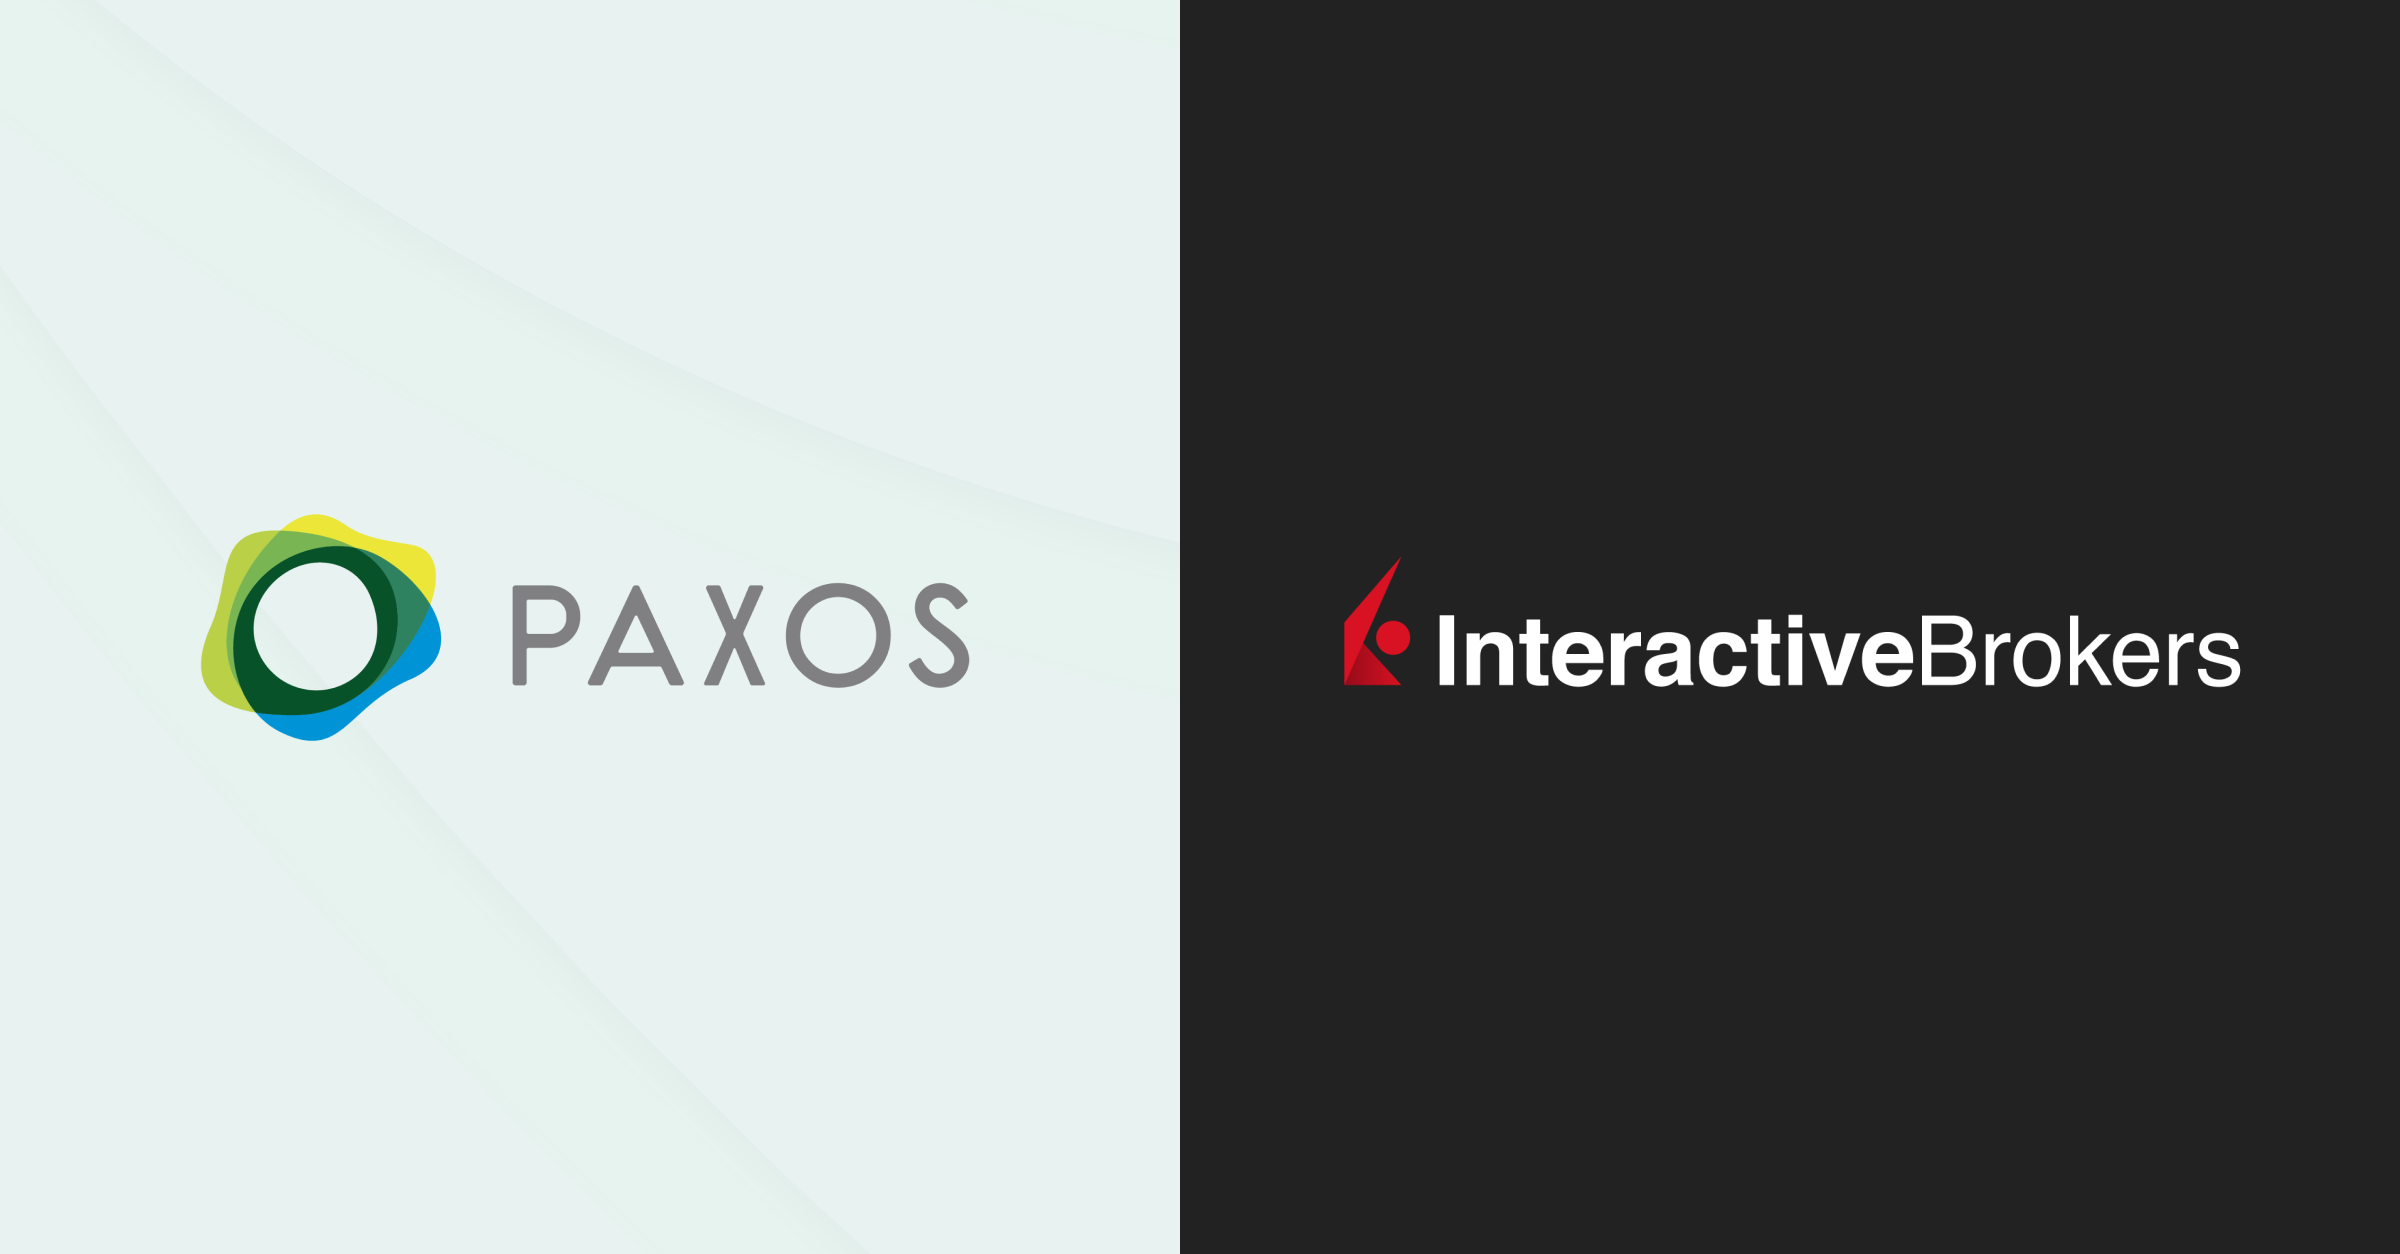 Mayanti Porn - Interactive Brokers Partners Paxos to Launches Crypto Trading